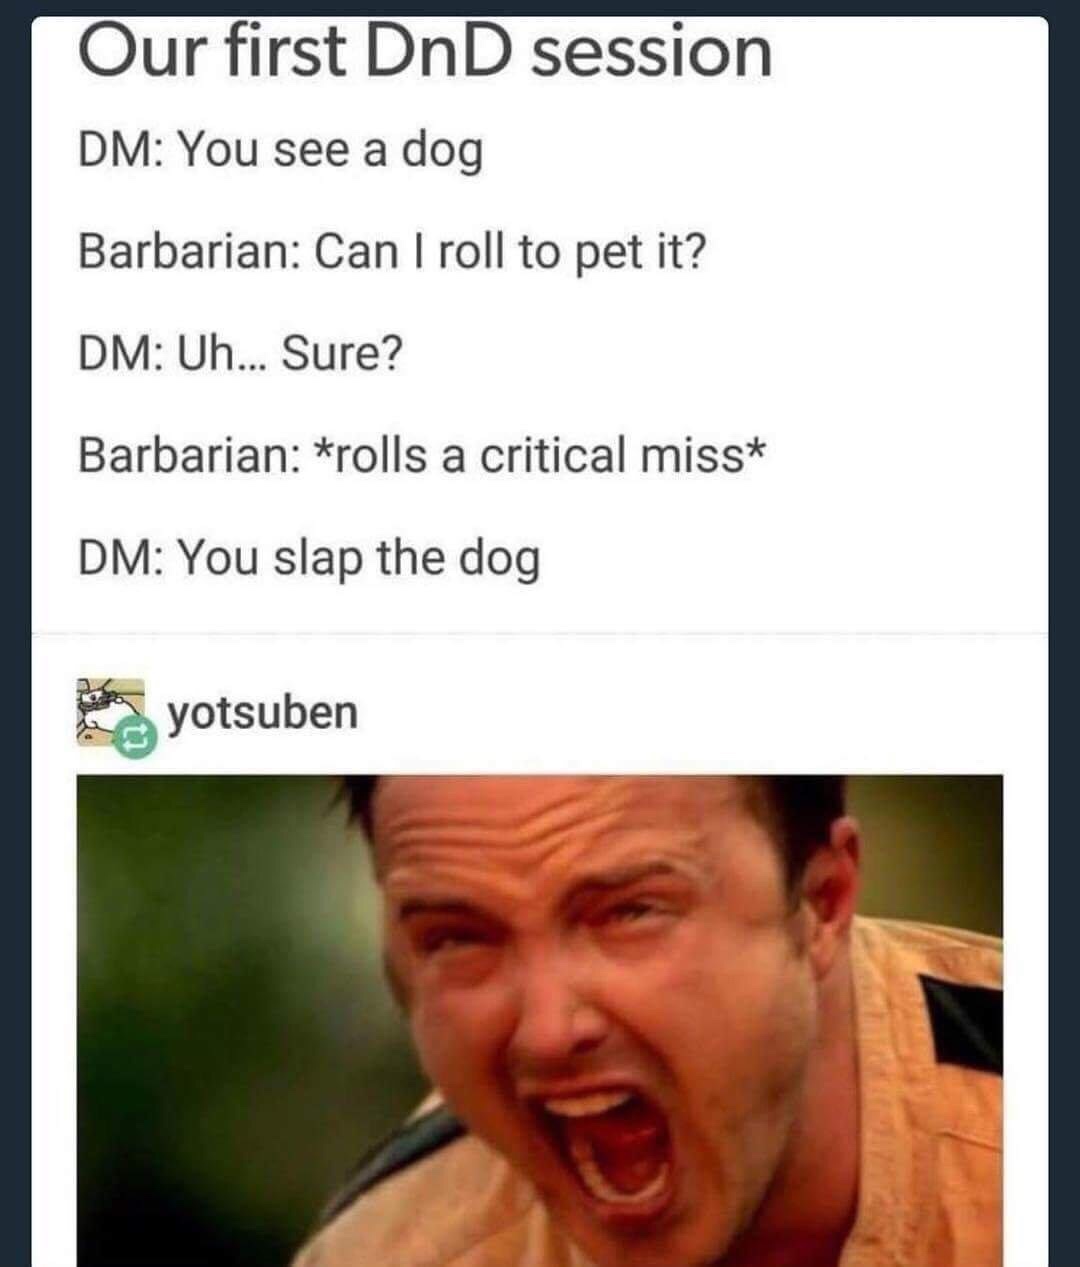 dungeons and dragons dm meme - Our first DnD session Dm You see a dog Barbarian Can I roll to pet it? Dm Uh... Sure? Barbarian rolls a critical miss Dm You slap the dog yotsuben